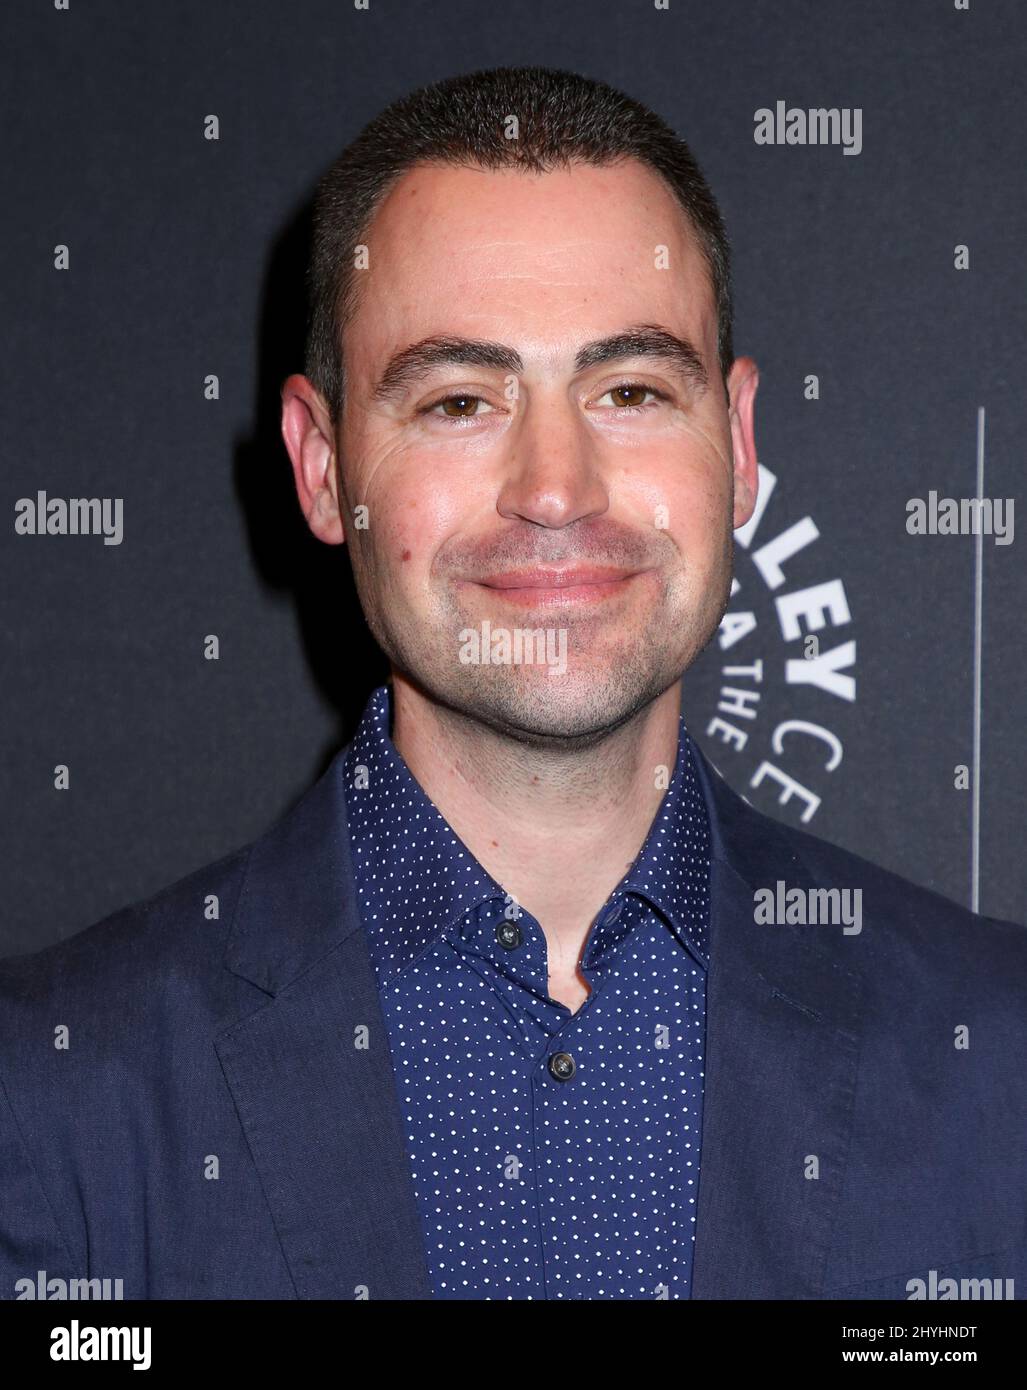 Steven Lilien attending An Evening with 'God Friended Me' in New York Stock Photo